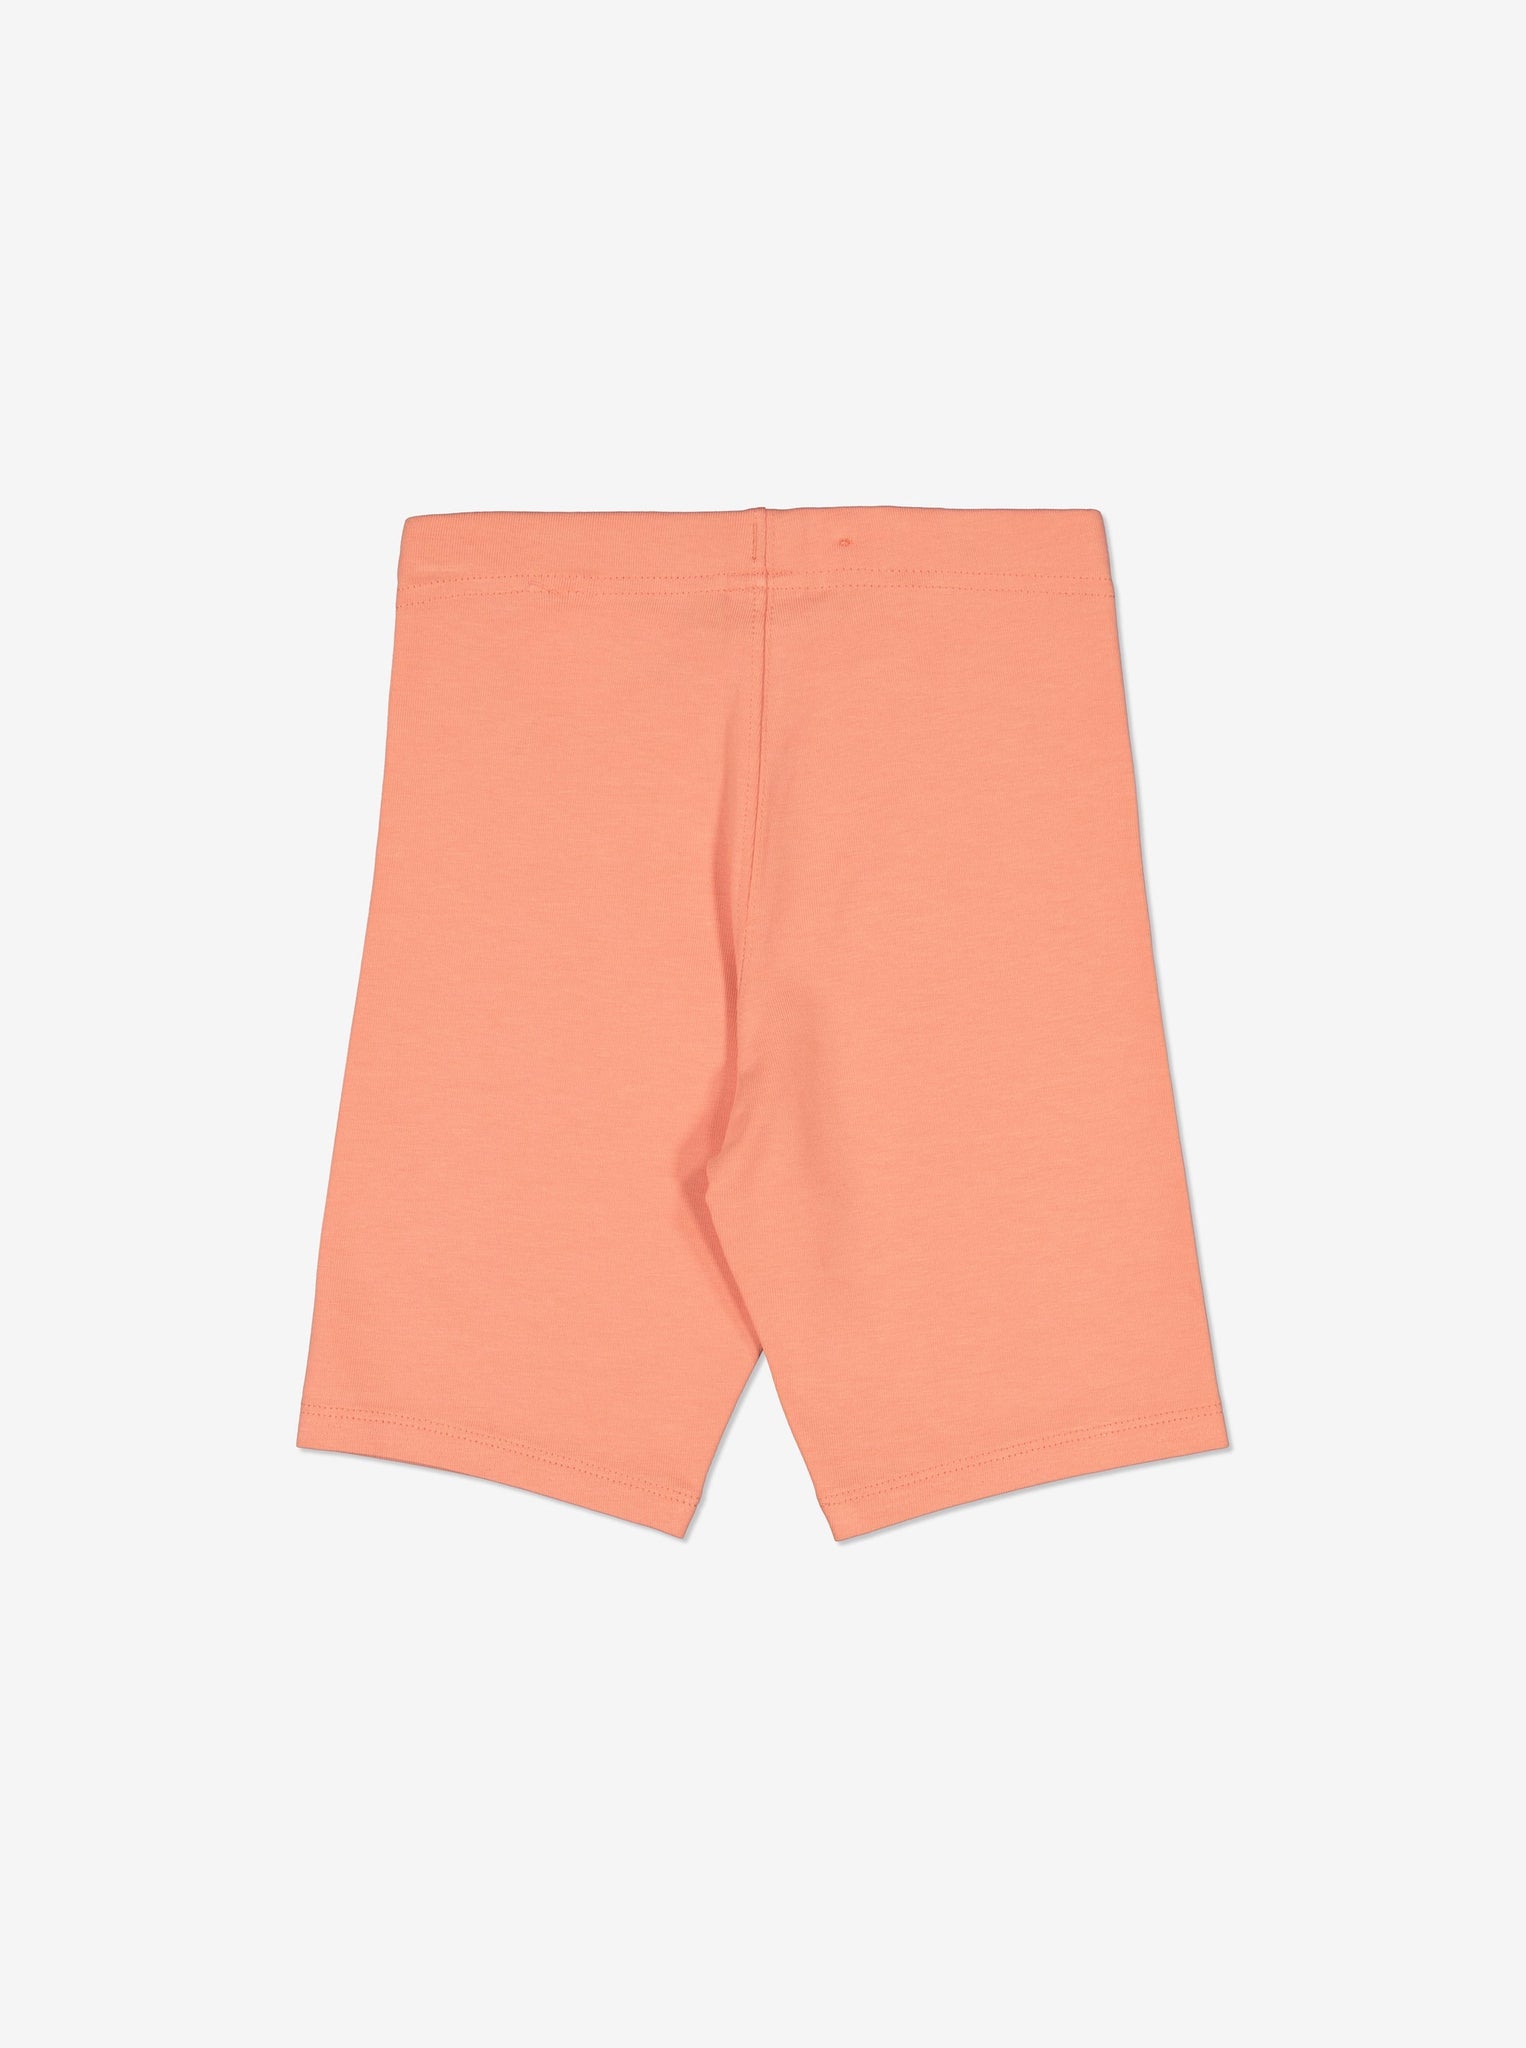 Kids Legging Style Cycling Shorts from Polarn O. Pyret Kidswear. Made using sustainable sourced materials.